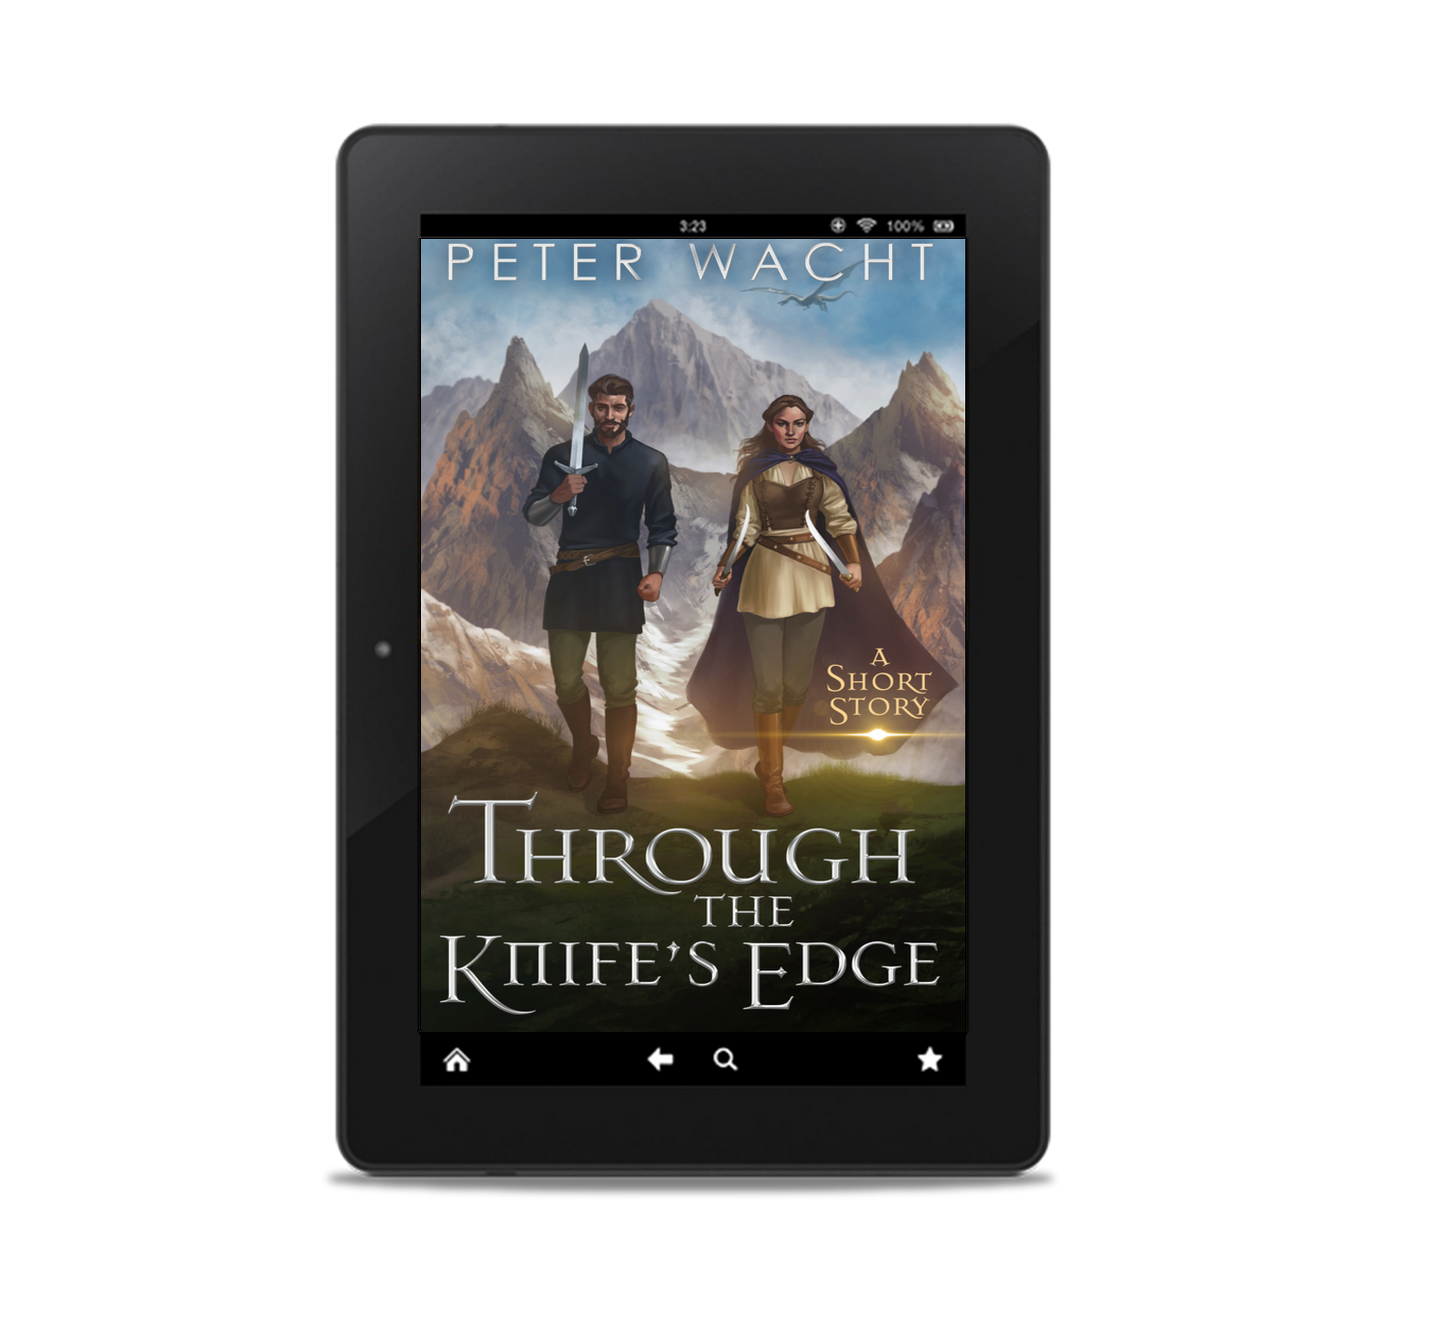 Your FREE Copy of Through the Knife's Edge